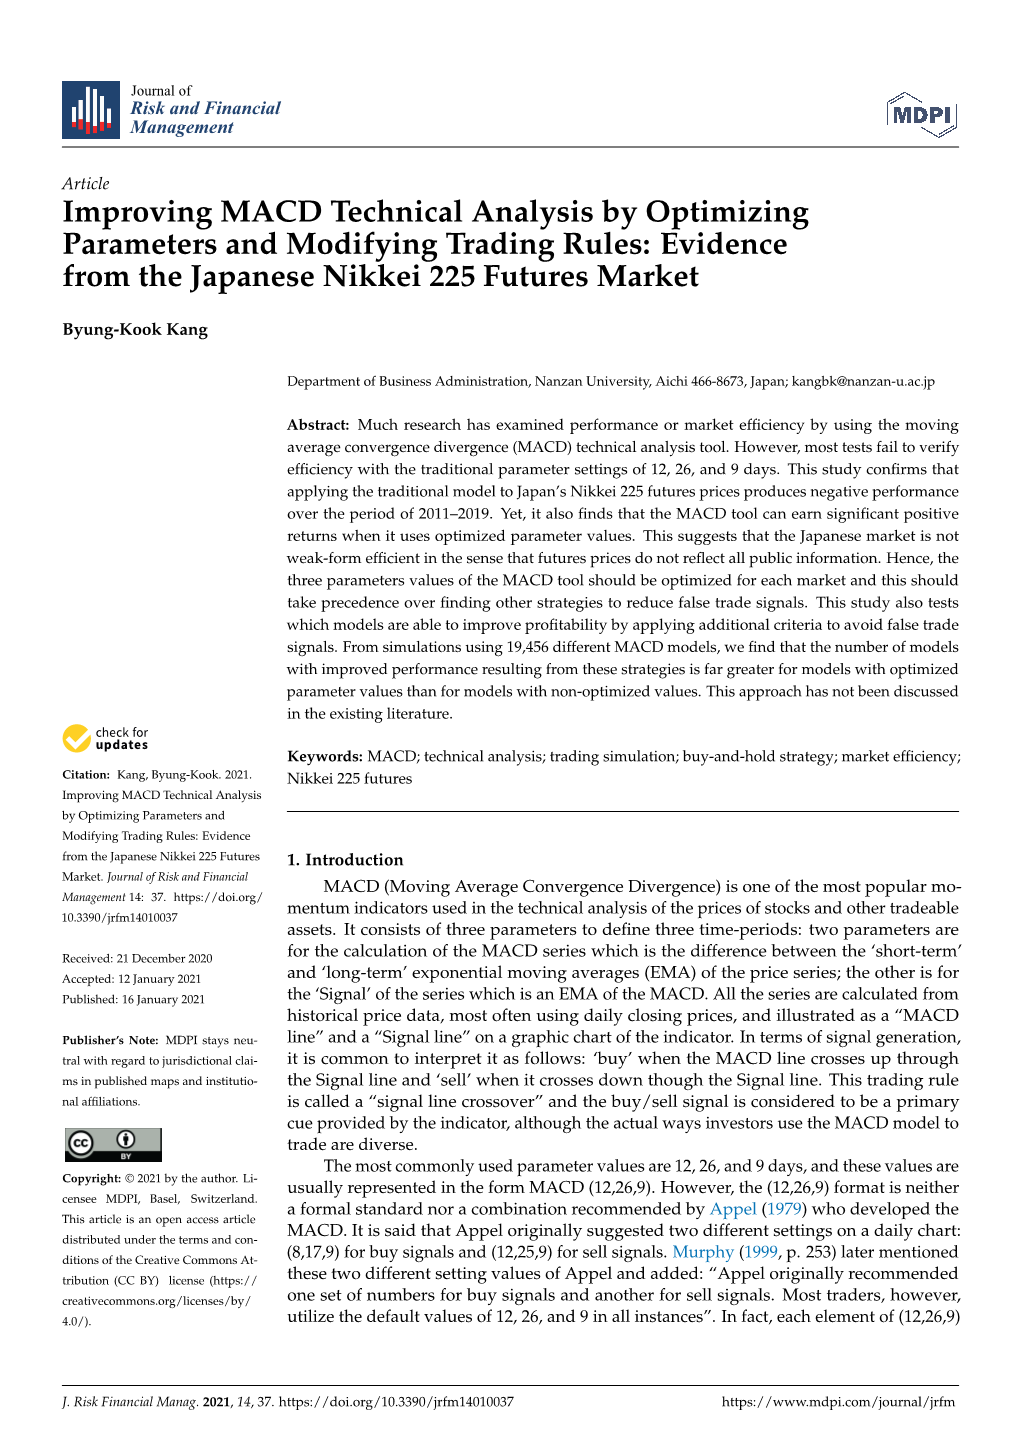 Improving MACD Technical Analysis by Optimizing Parameters and Modifying Trading Rules: Evidence from the Japanese Nikkei 225 Futures Market